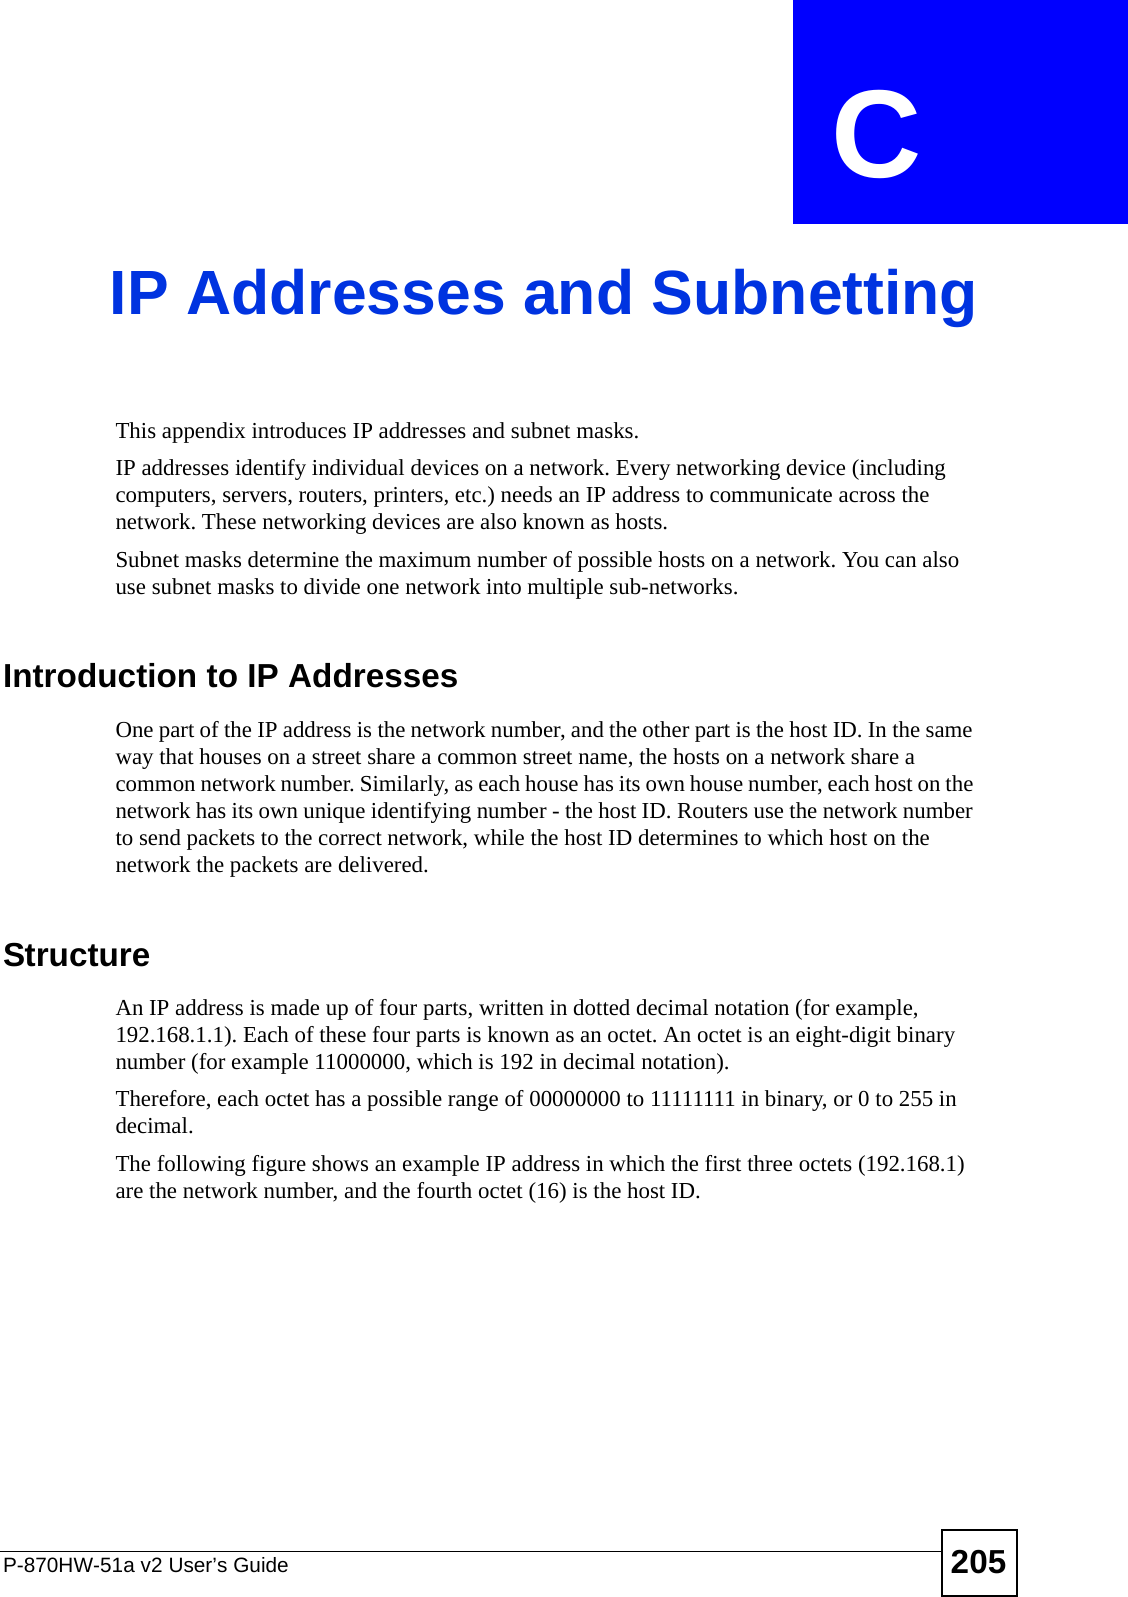 P-870HW-51a v2 User’s Guide 205APPENDIX  C IP Addresses and SubnettingThis appendix introduces IP addresses and subnet masks. IP addresses identify individual devices on a network. Every networking device (including computers, servers, routers, printers, etc.) needs an IP address to communicate across the network. These networking devices are also known as hosts.Subnet masks determine the maximum number of possible hosts on a network. You can also use subnet masks to divide one network into multiple sub-networks.Introduction to IP AddressesOne part of the IP address is the network number, and the other part is the host ID. In the same way that houses on a street share a common street name, the hosts on a network share a common network number. Similarly, as each house has its own house number, each host on the network has its own unique identifying number - the host ID. Routers use the network number to send packets to the correct network, while the host ID determines to which host on the network the packets are delivered.StructureAn IP address is made up of four parts, written in dotted decimal notation (for example, 192.168.1.1). Each of these four parts is known as an octet. An octet is an eight-digit binary number (for example 11000000, which is 192 in decimal notation). Therefore, each octet has a possible range of 00000000 to 11111111 in binary, or 0 to 255 in decimal.The following figure shows an example IP address in which the first three octets (192.168.1) are the network number, and the fourth octet (16) is the host ID.